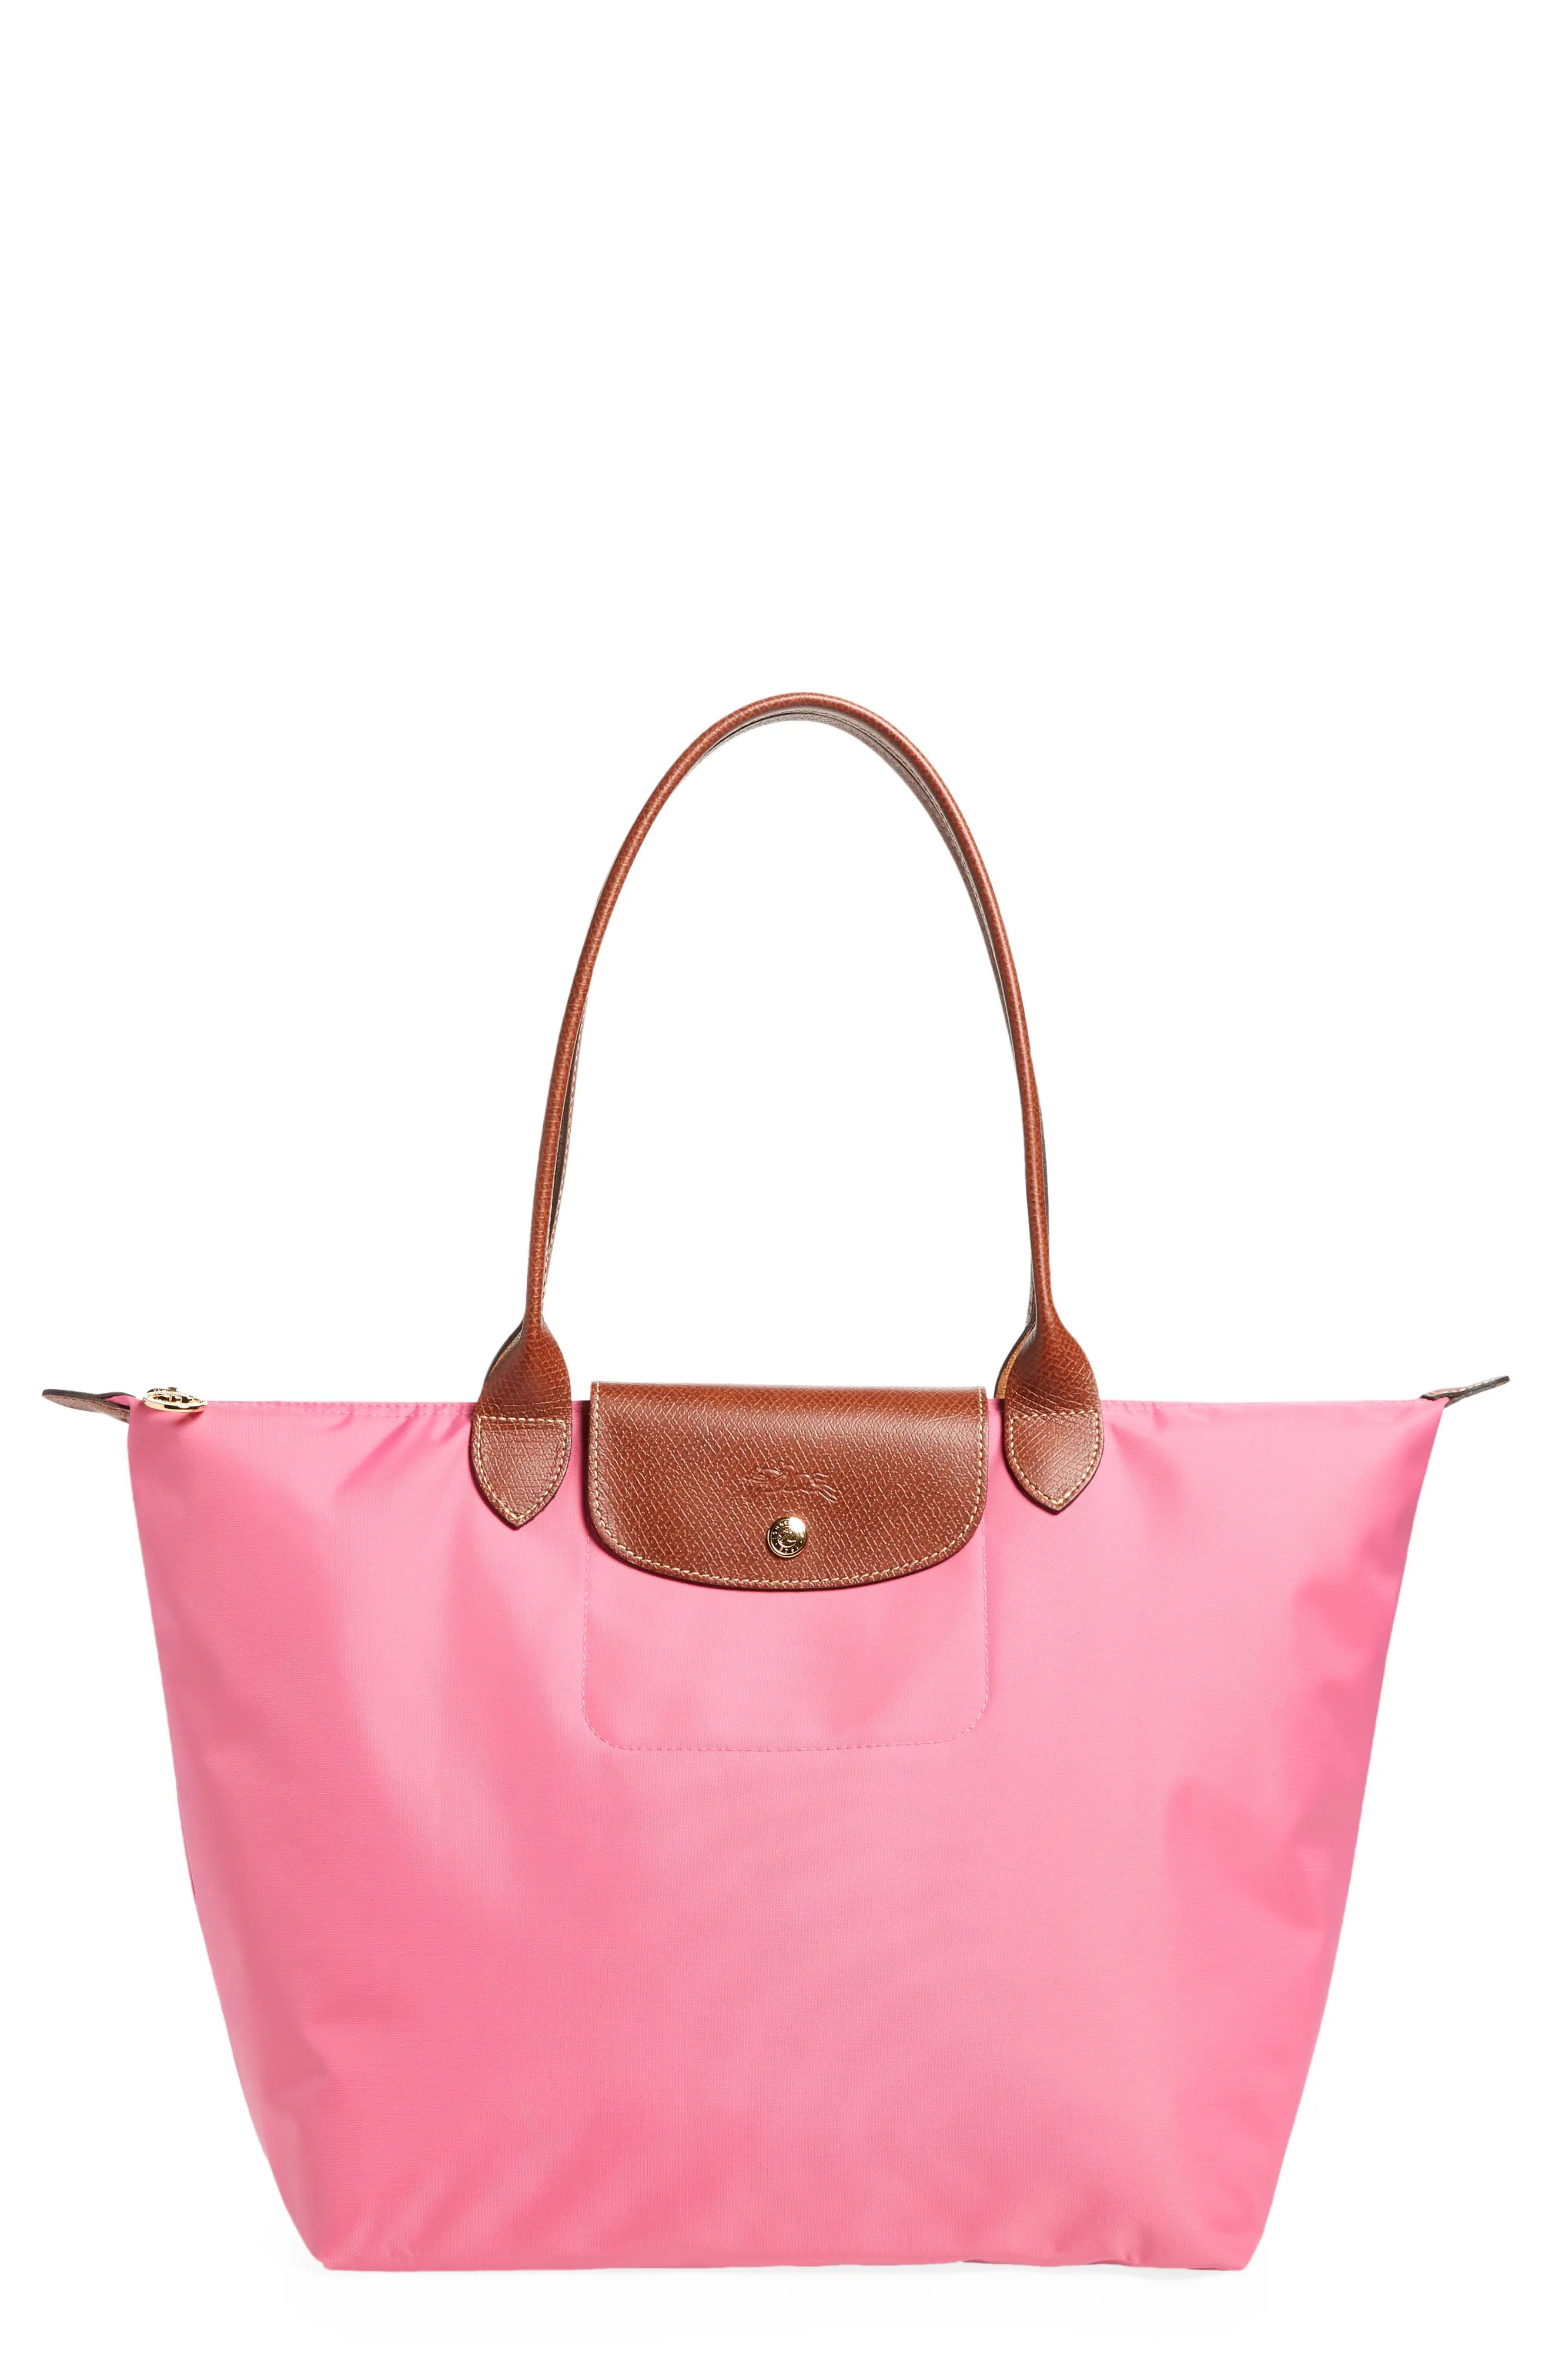 Longchamp Large Le Pliage Tote in Peony at Nordstrom | Nordstrom